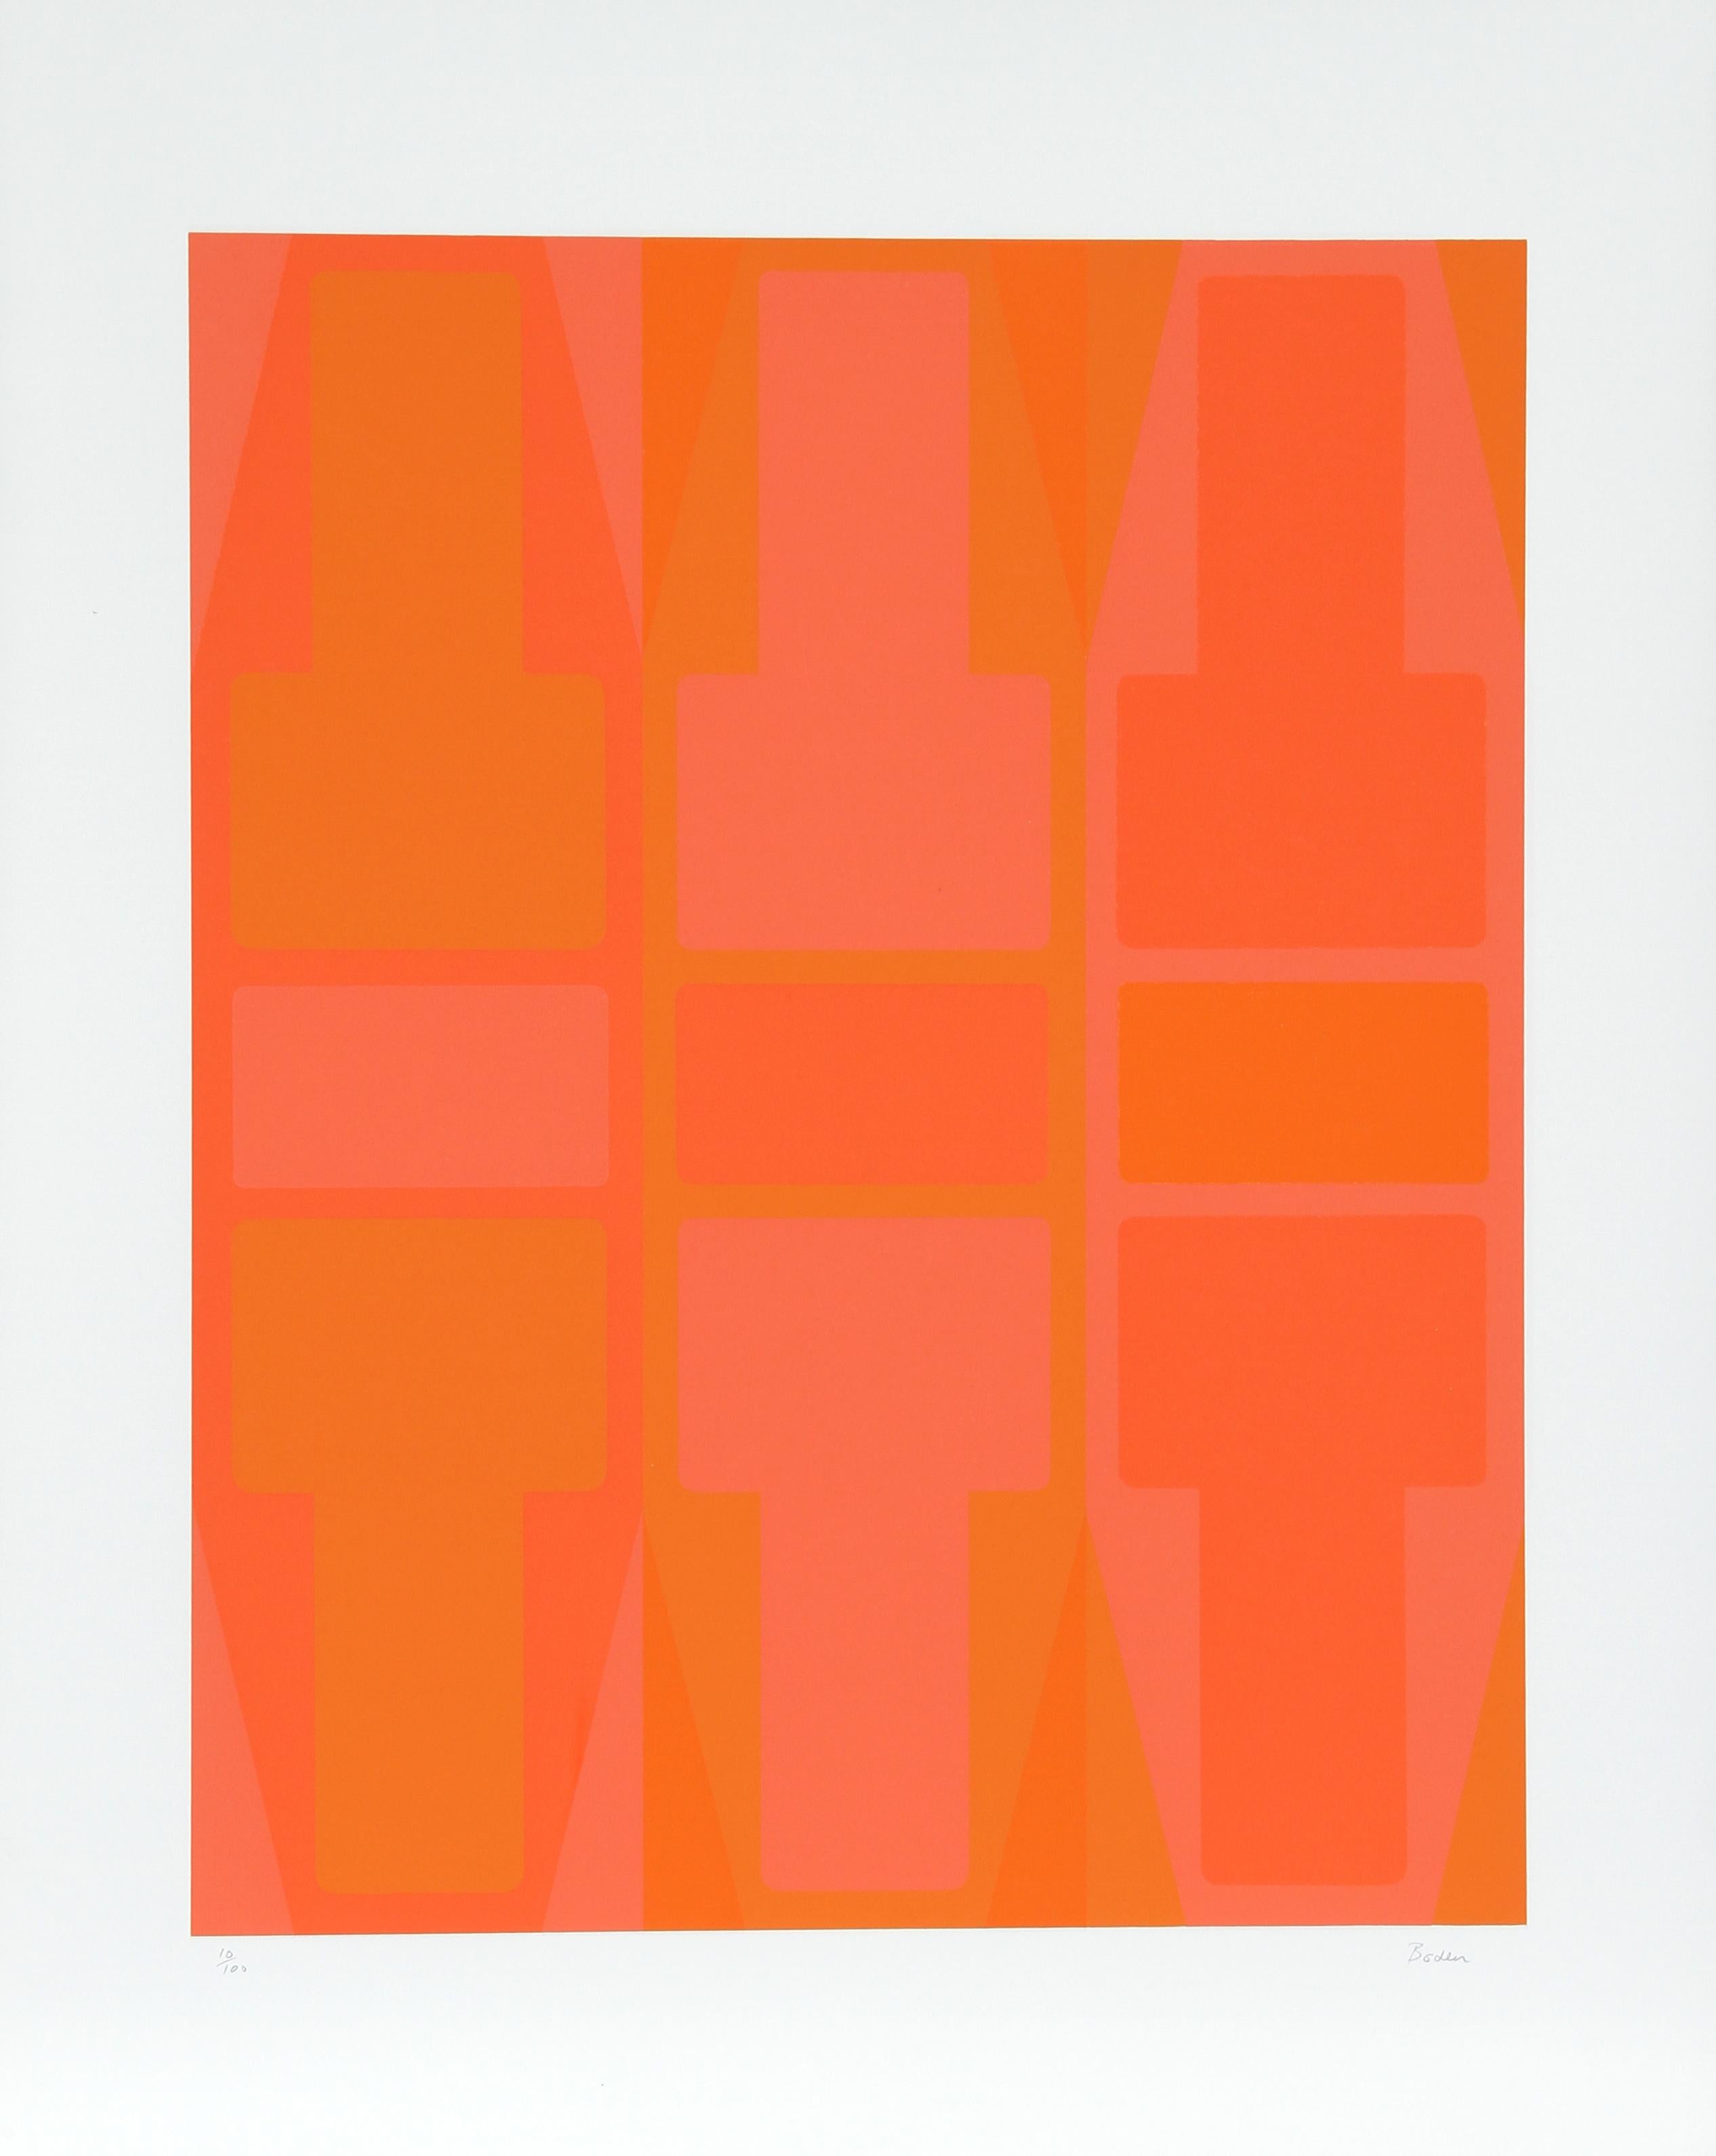 Artist: Arthur Boden, American
Title: T Series (Orange)
Year:  circa 1970
Medium:  Serigraph, signed and numbered in pencil
Edition:  100
Size:  29 in. x 23 in. (73.66 cm x 58.42 cm) 